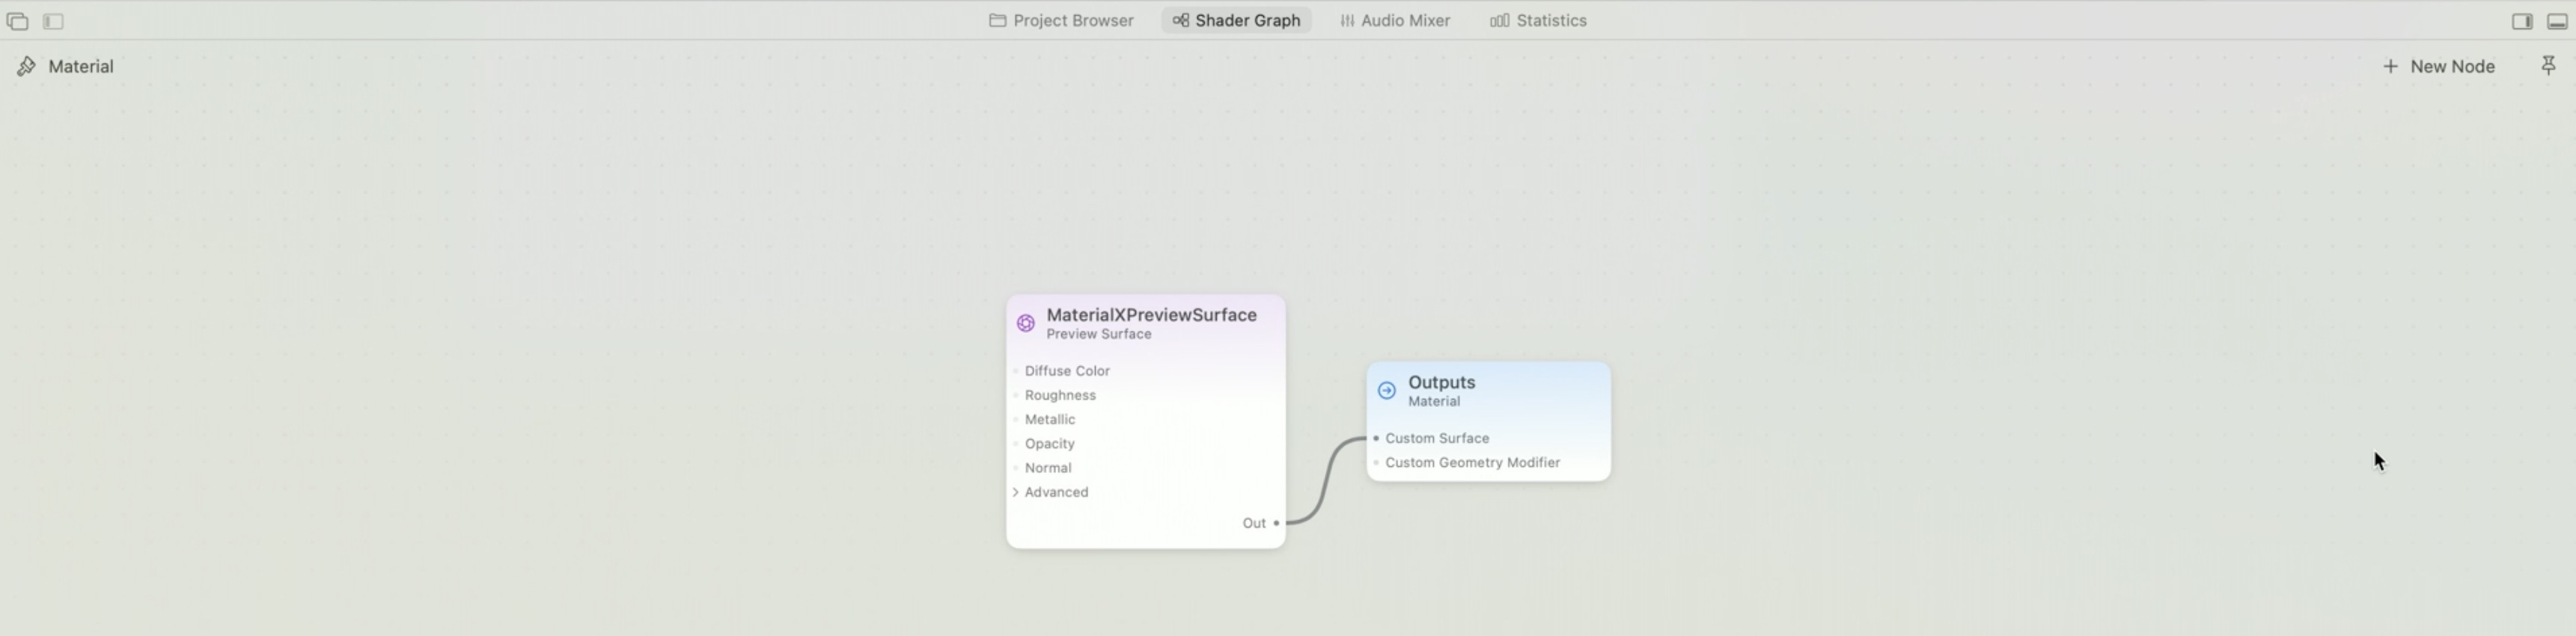 the Yosemite Valley model in Reality Composer Pro